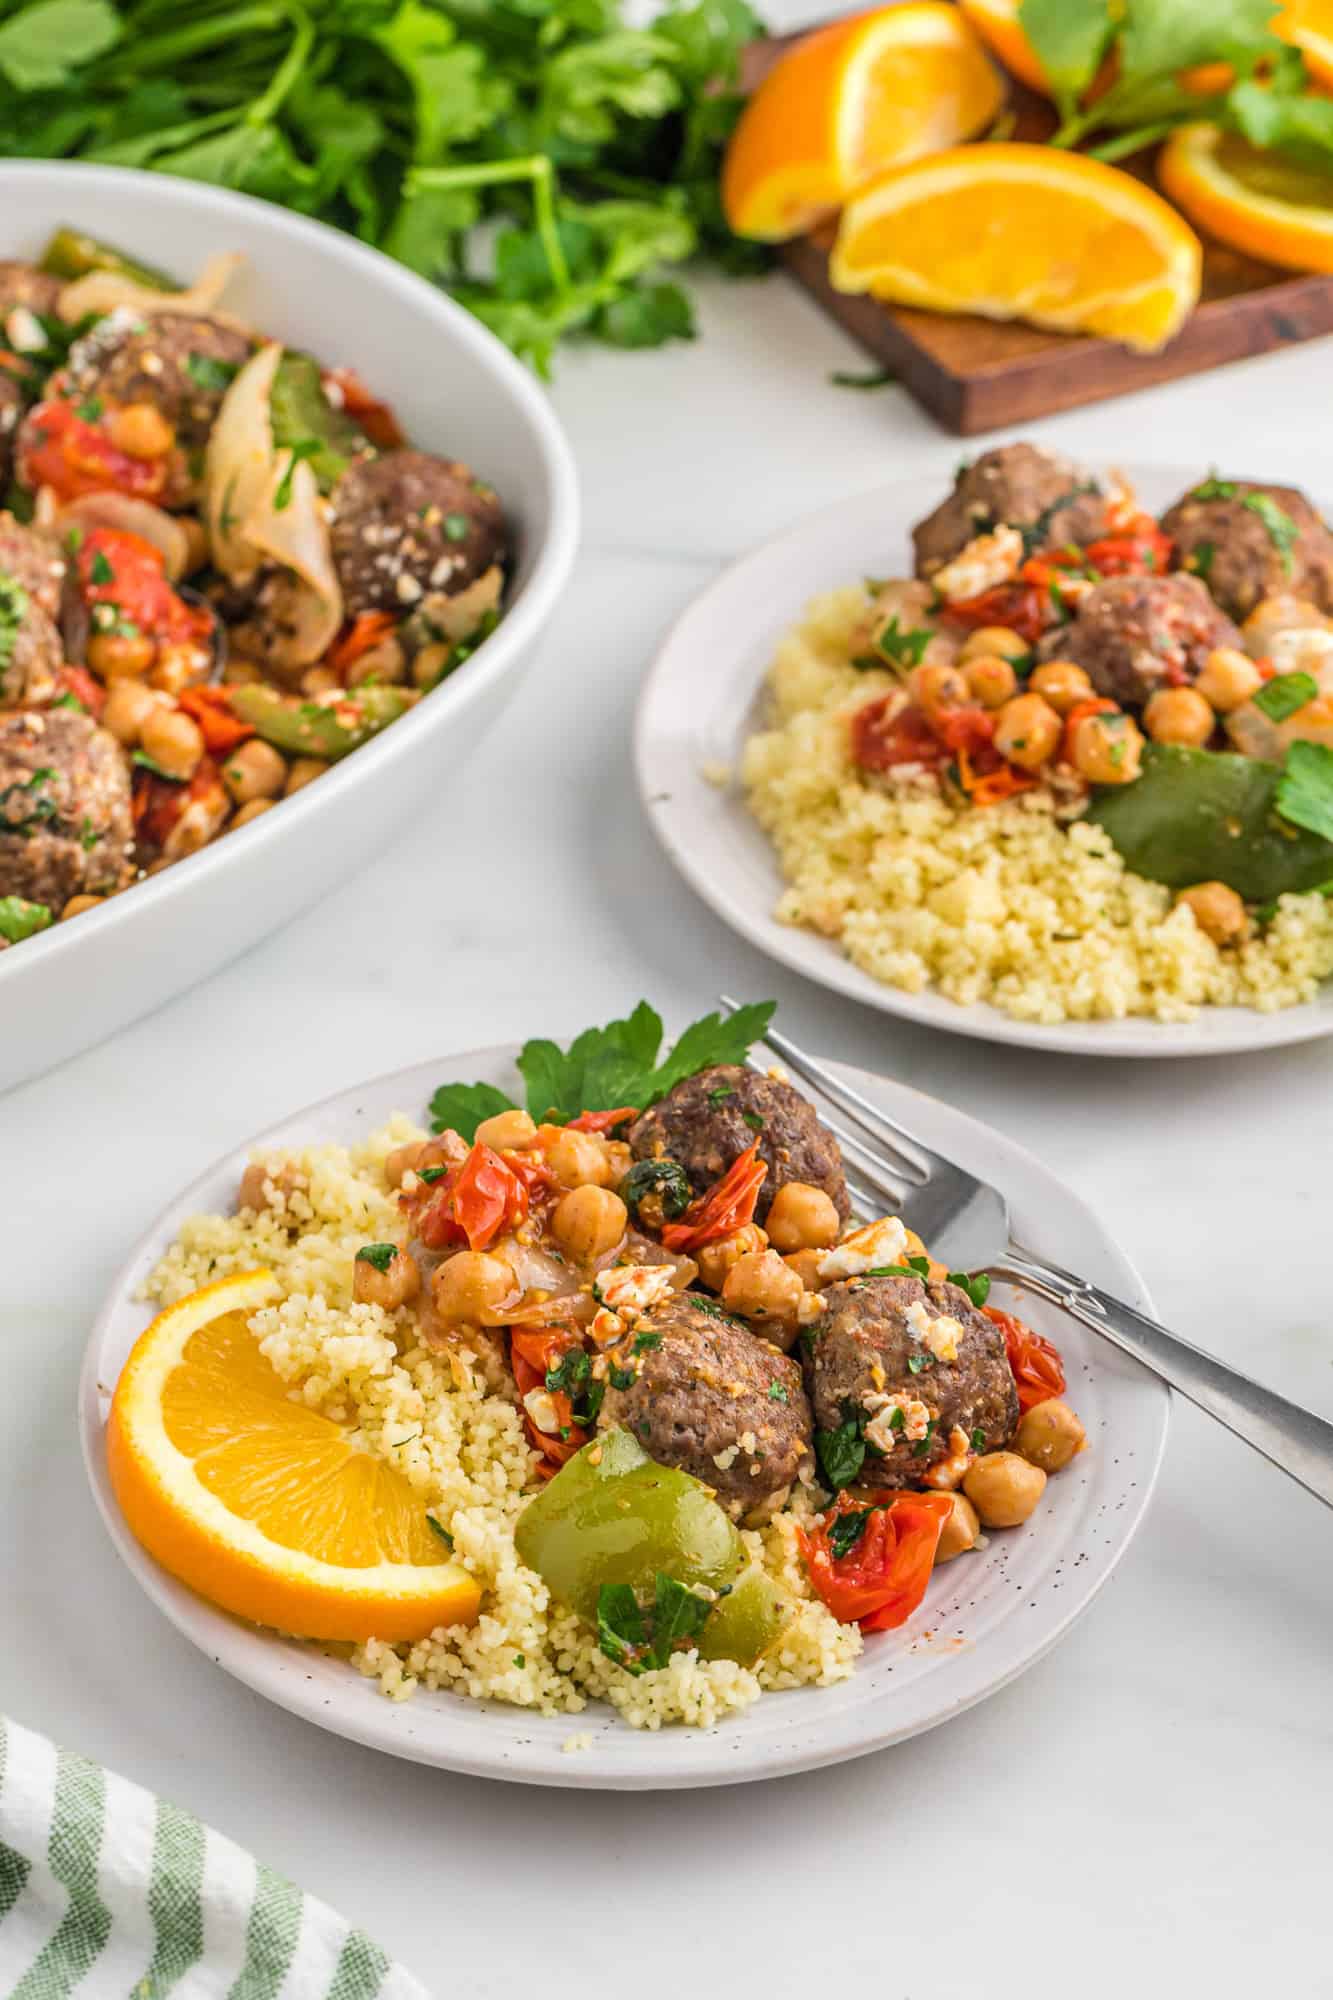 Plated couscous and meatballs with a wedge of orange.